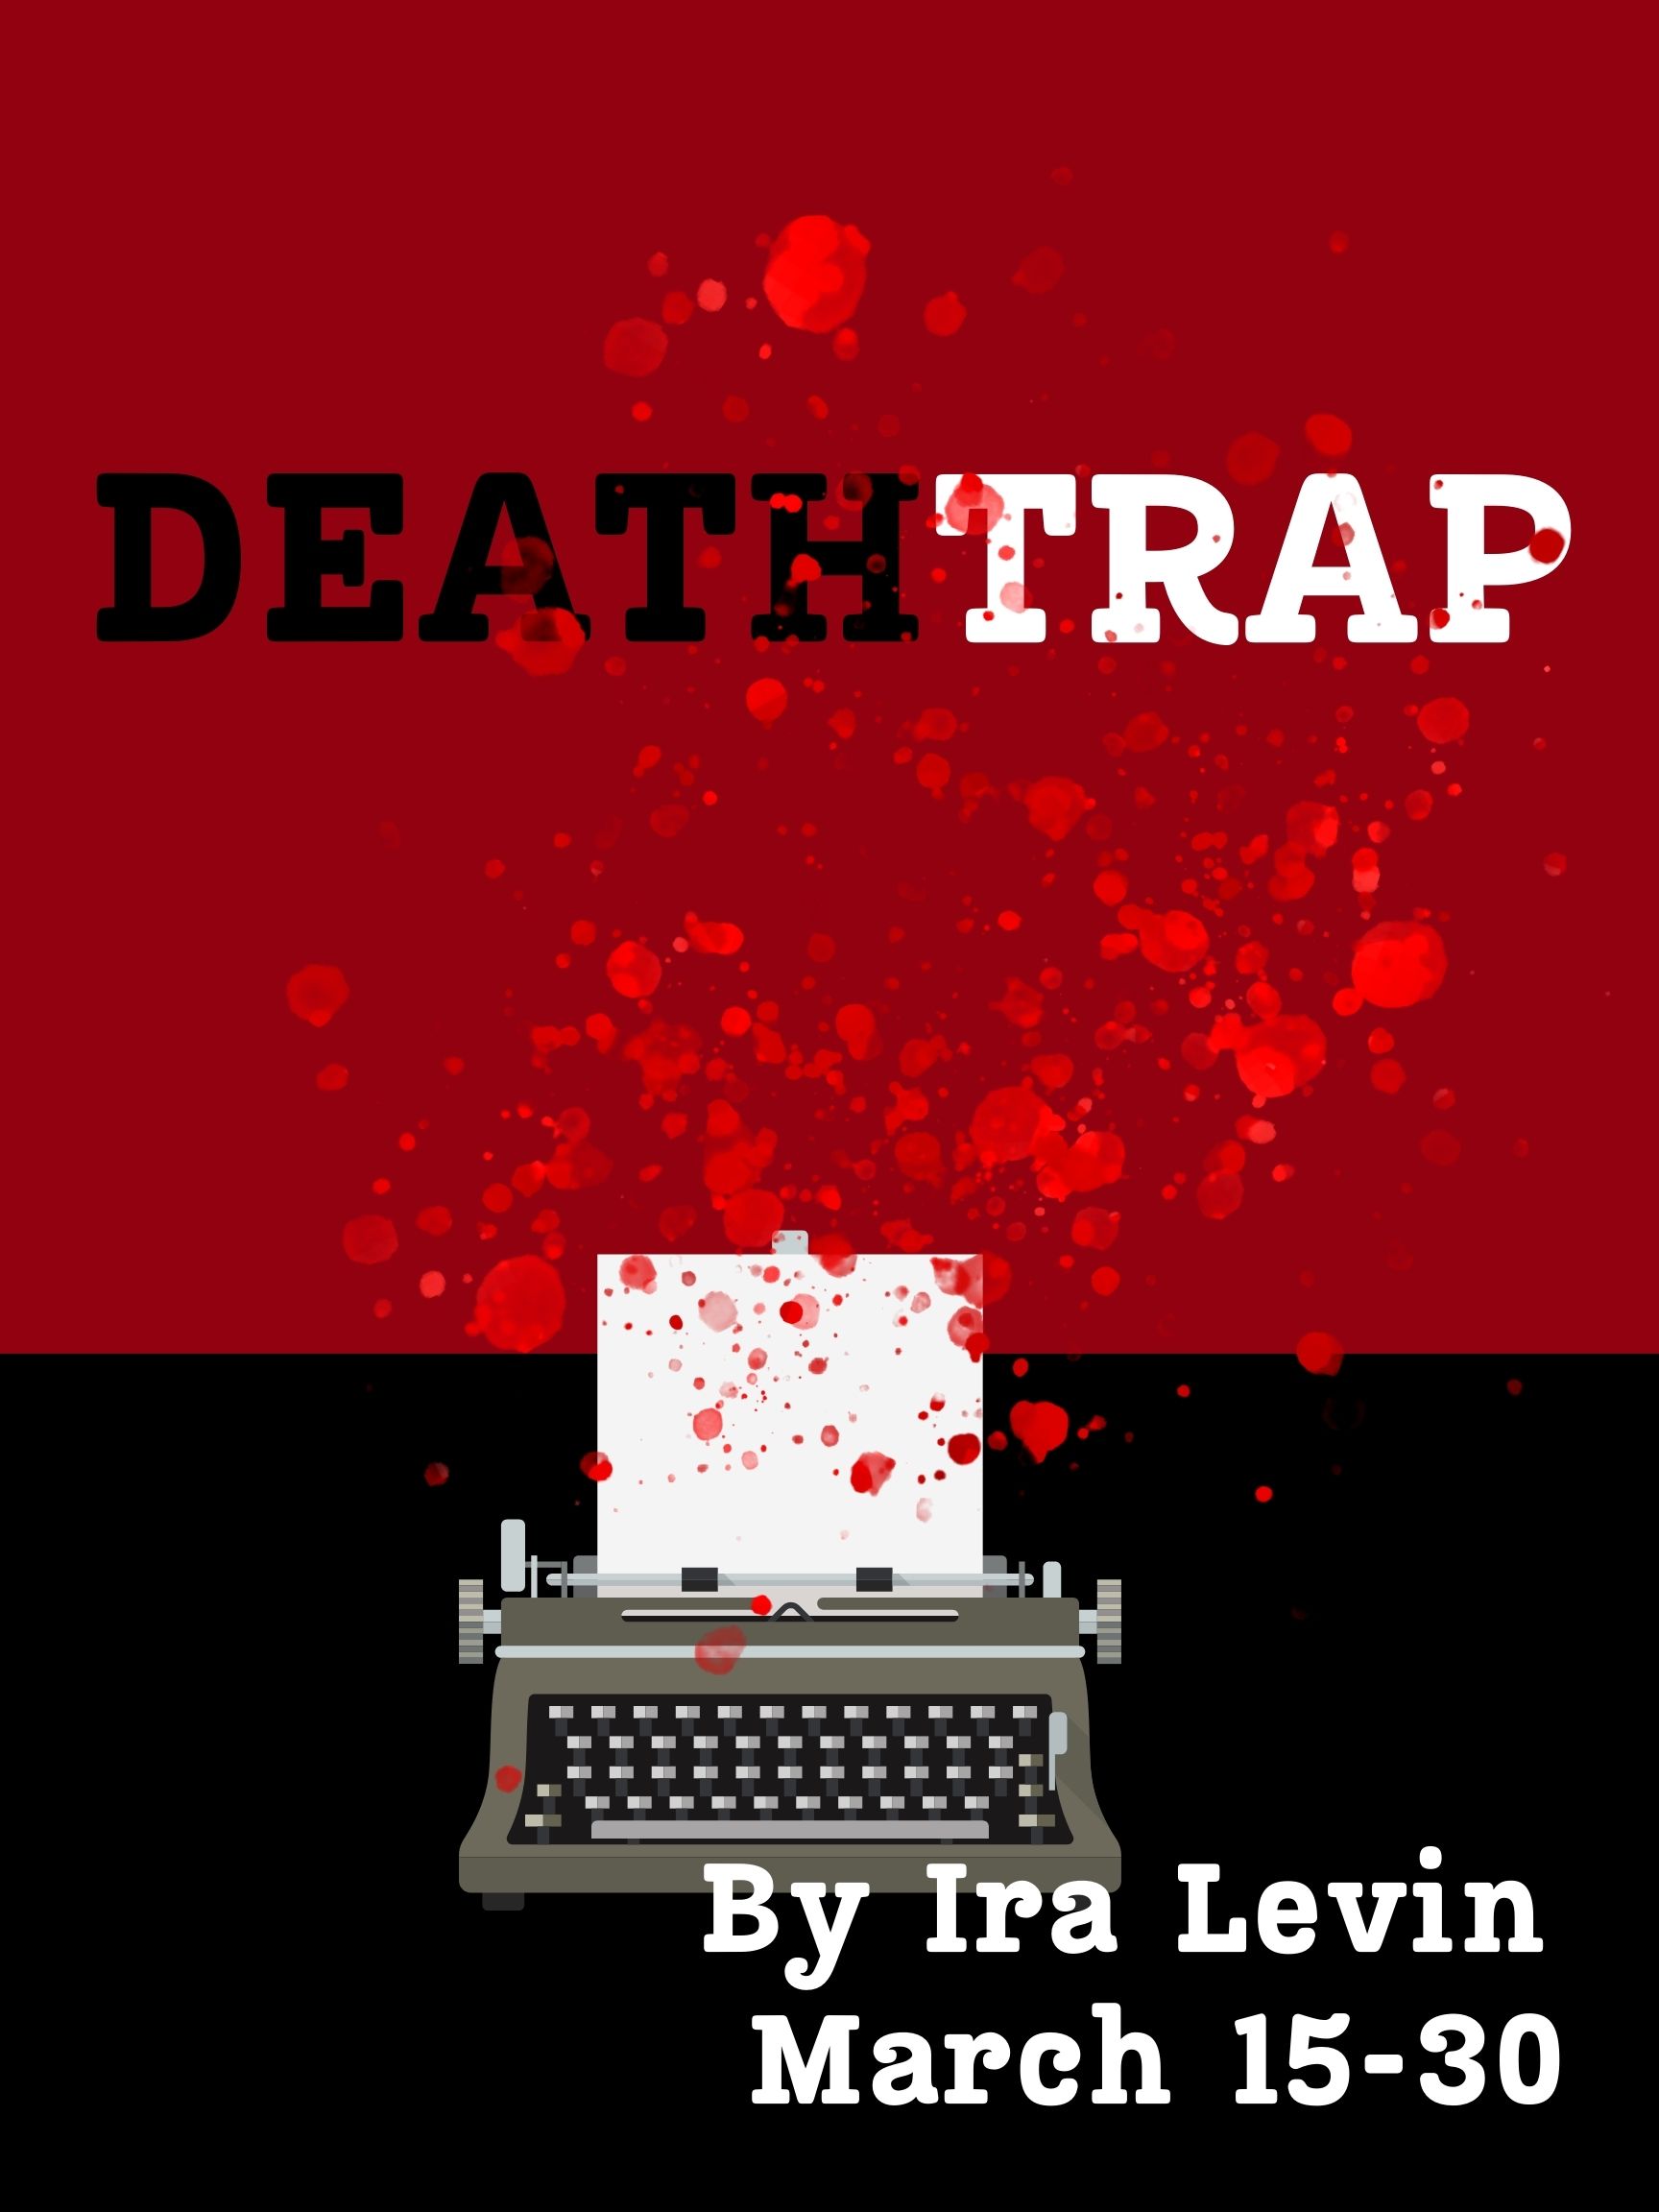 Deathtrap by Hill Country Arts Foundation (HCAF)